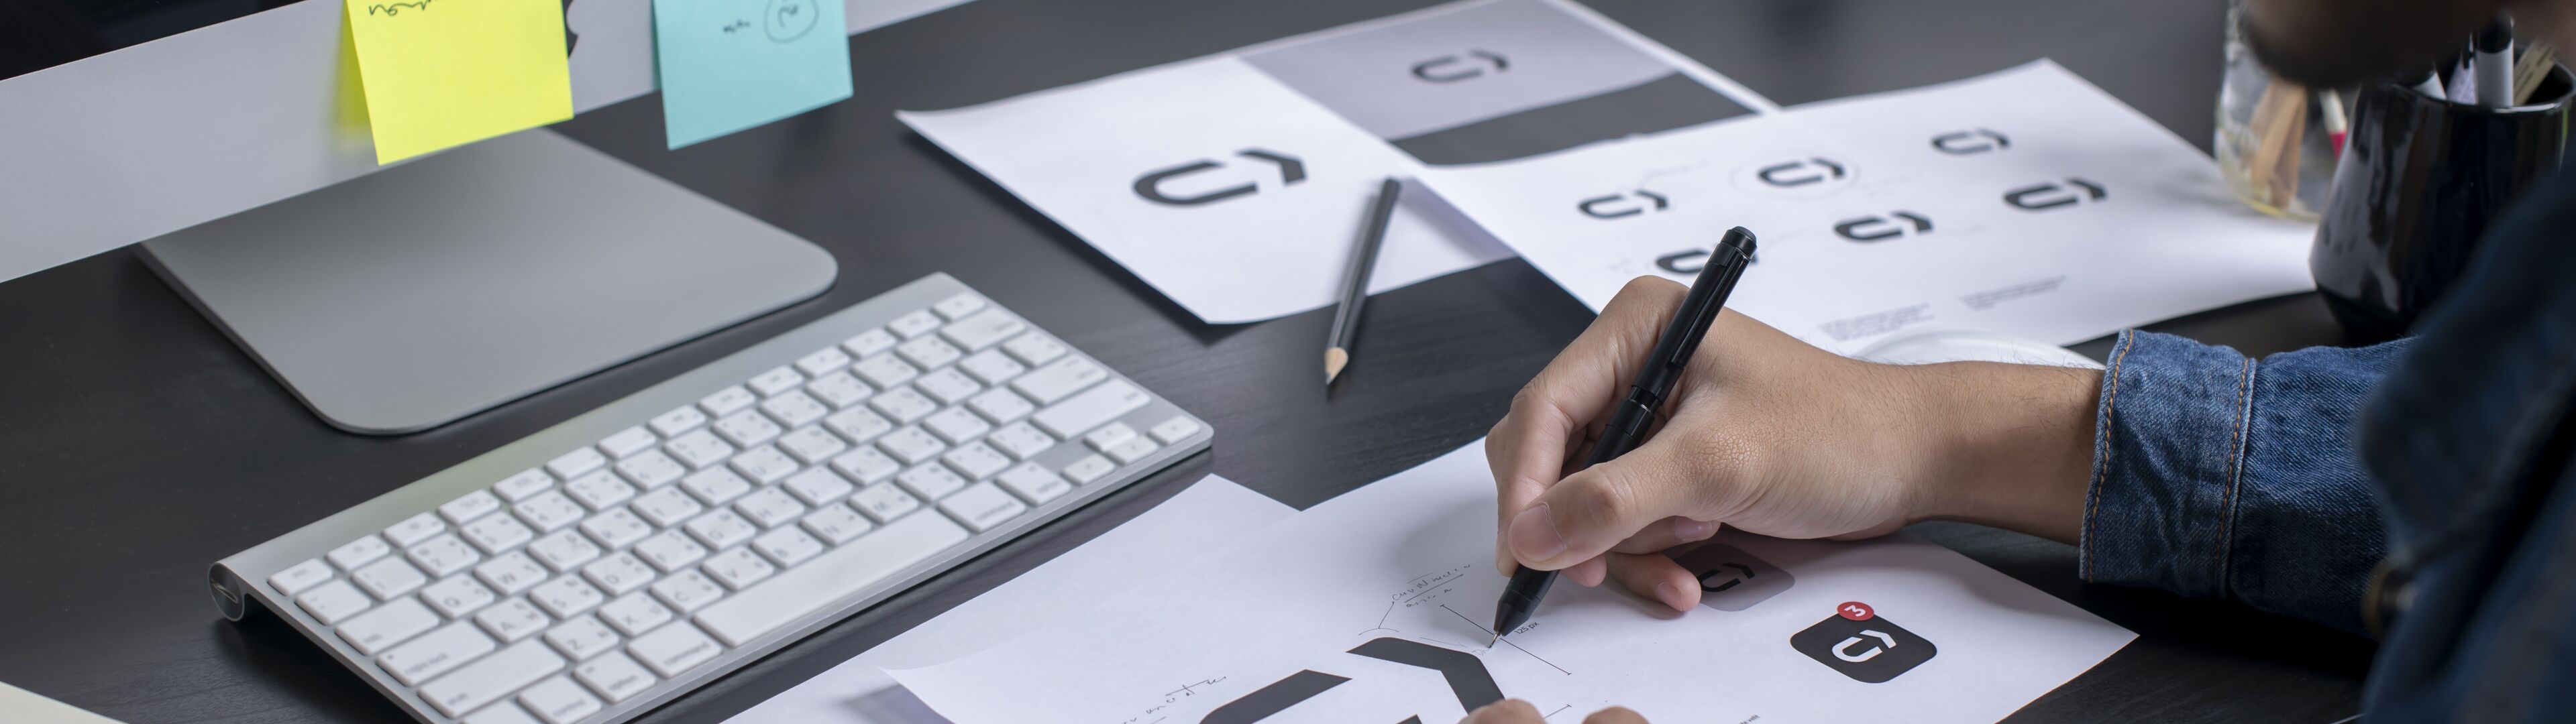 A graphic designer meticulously refining a logo design in a well-organized workspace.